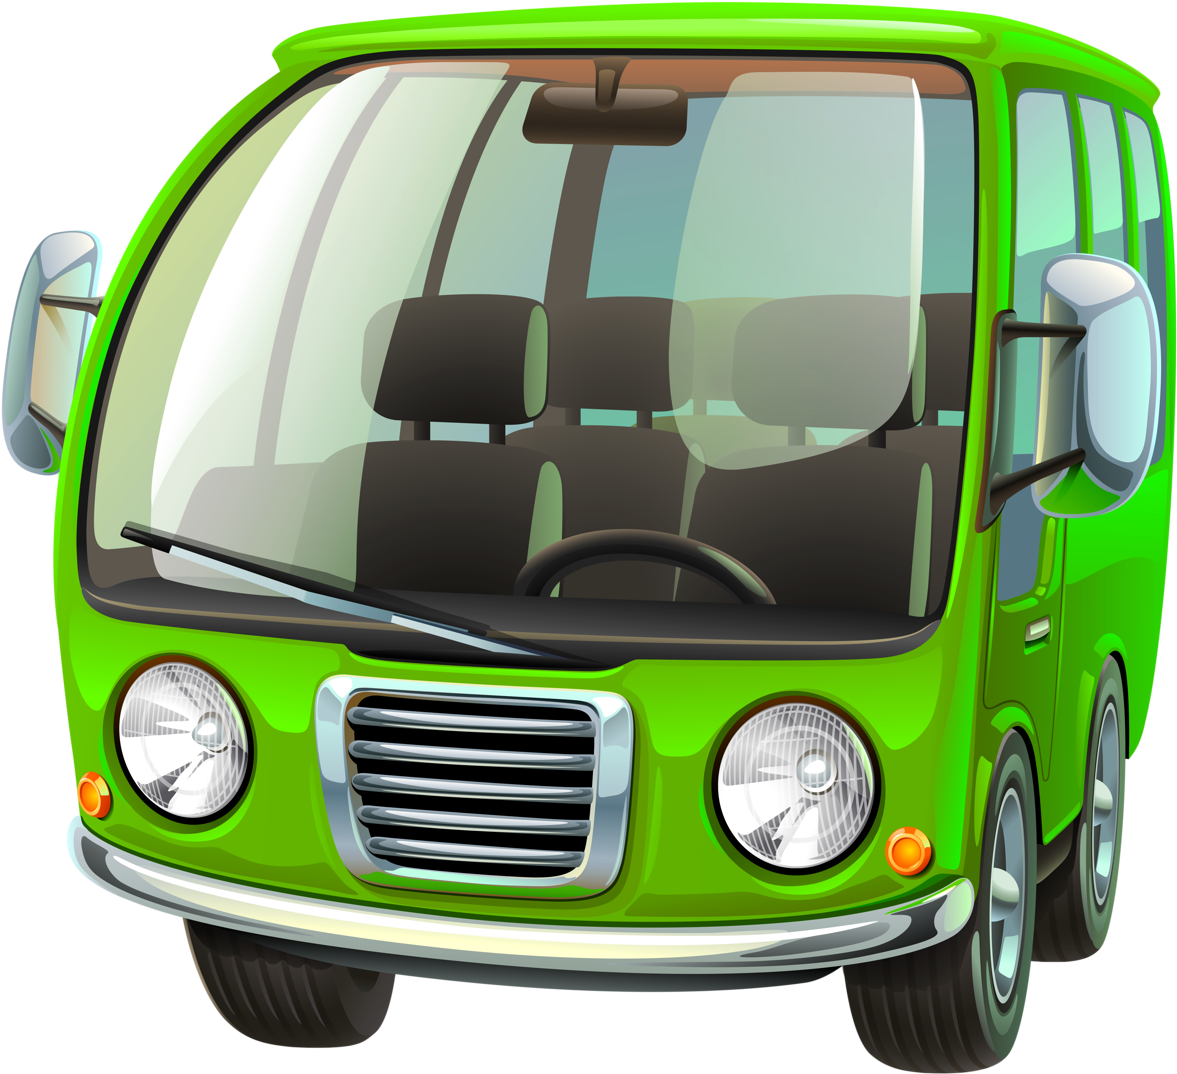 Download 1 - Tour Bus Cartoon PNG Image with No Background 